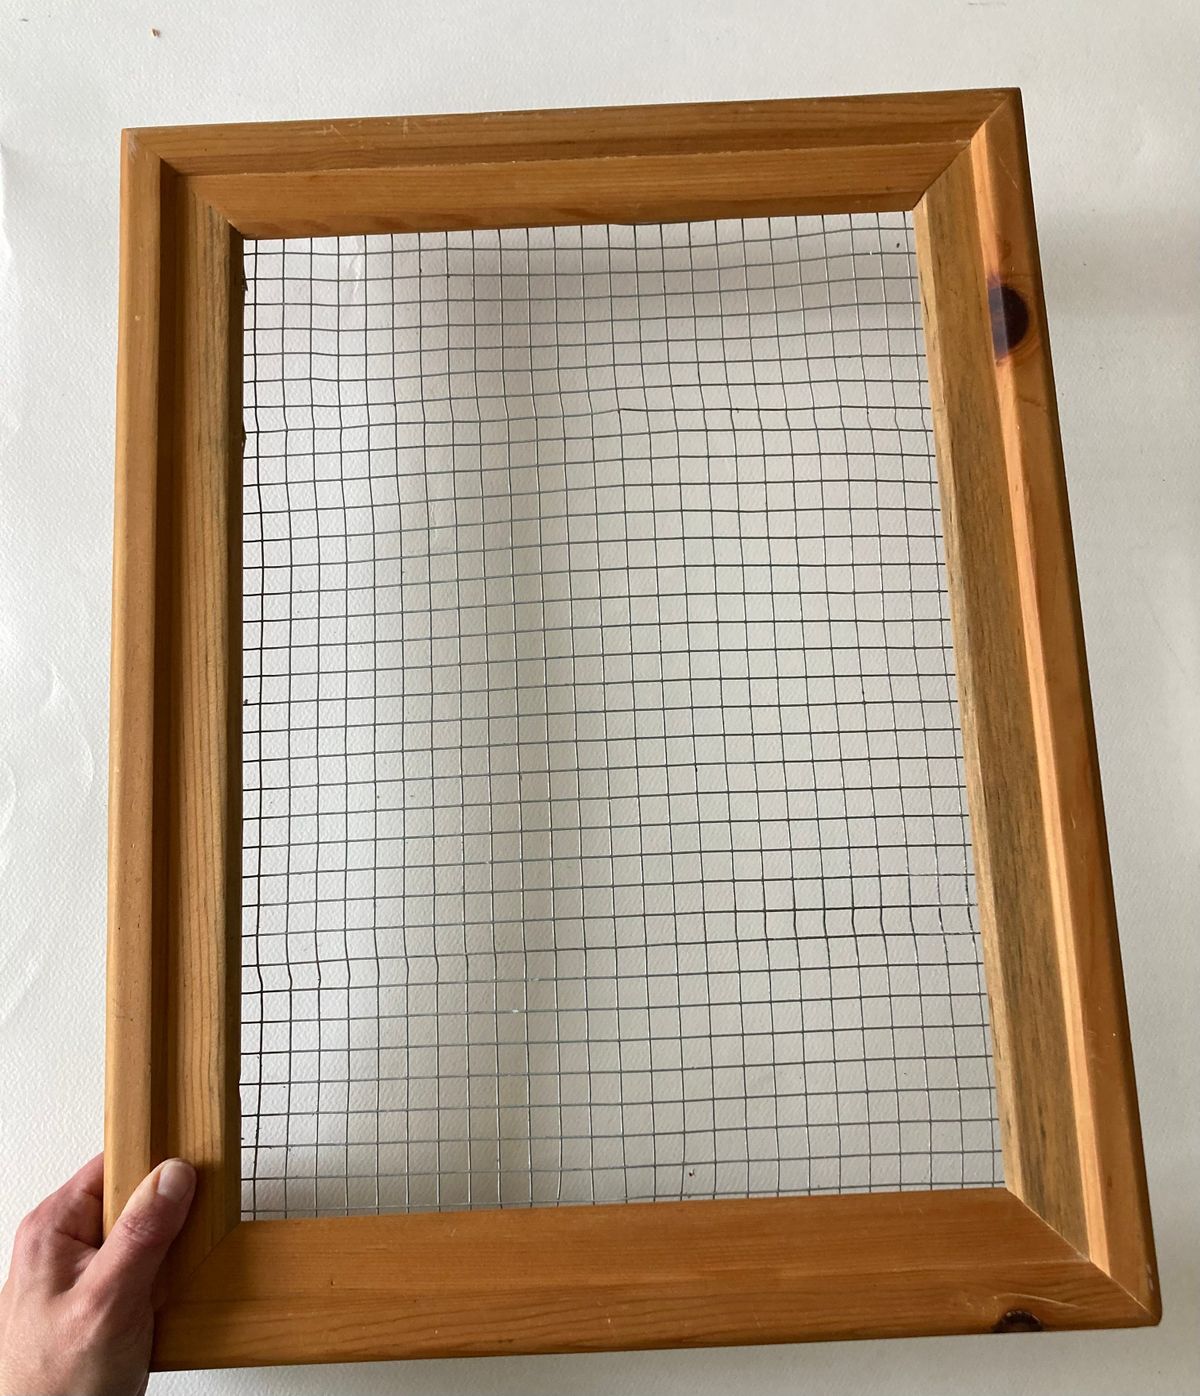 Cut a piece of hardwire cloth to fit in the frame and use a staple gun to attach it.  (Katie Patterson Larson/For The Spokesman-Review)